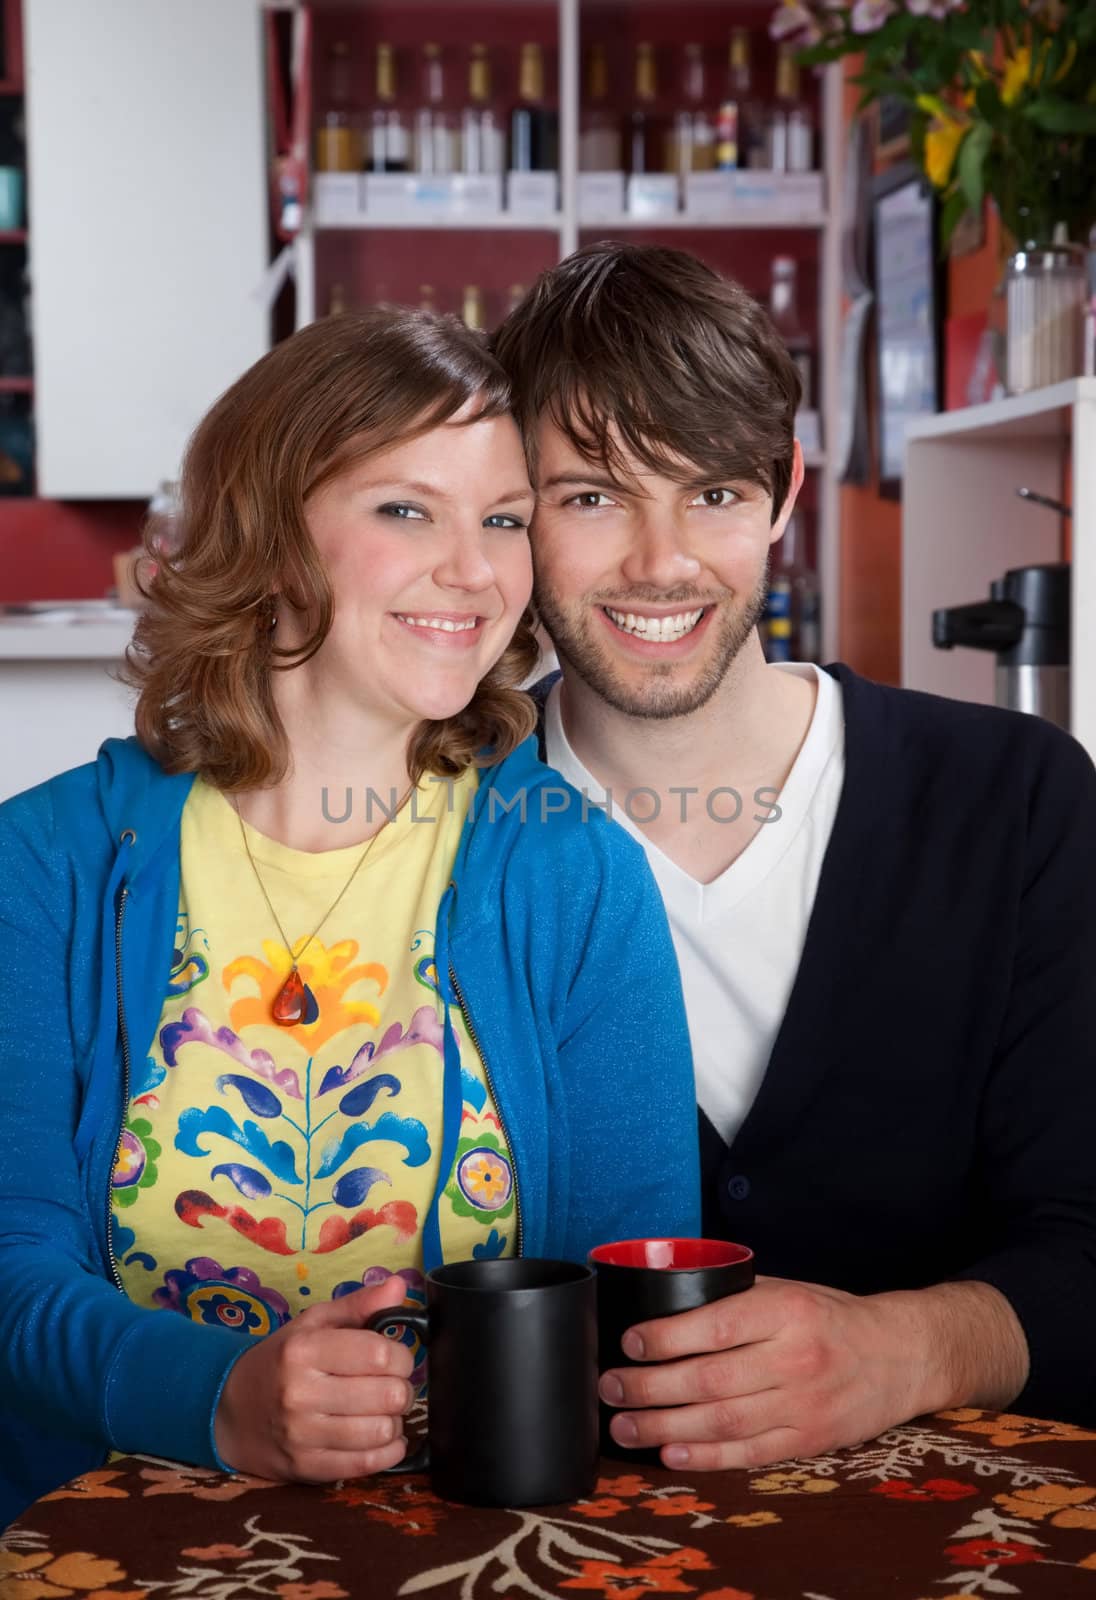 Smiling couple sitting together in a cafe